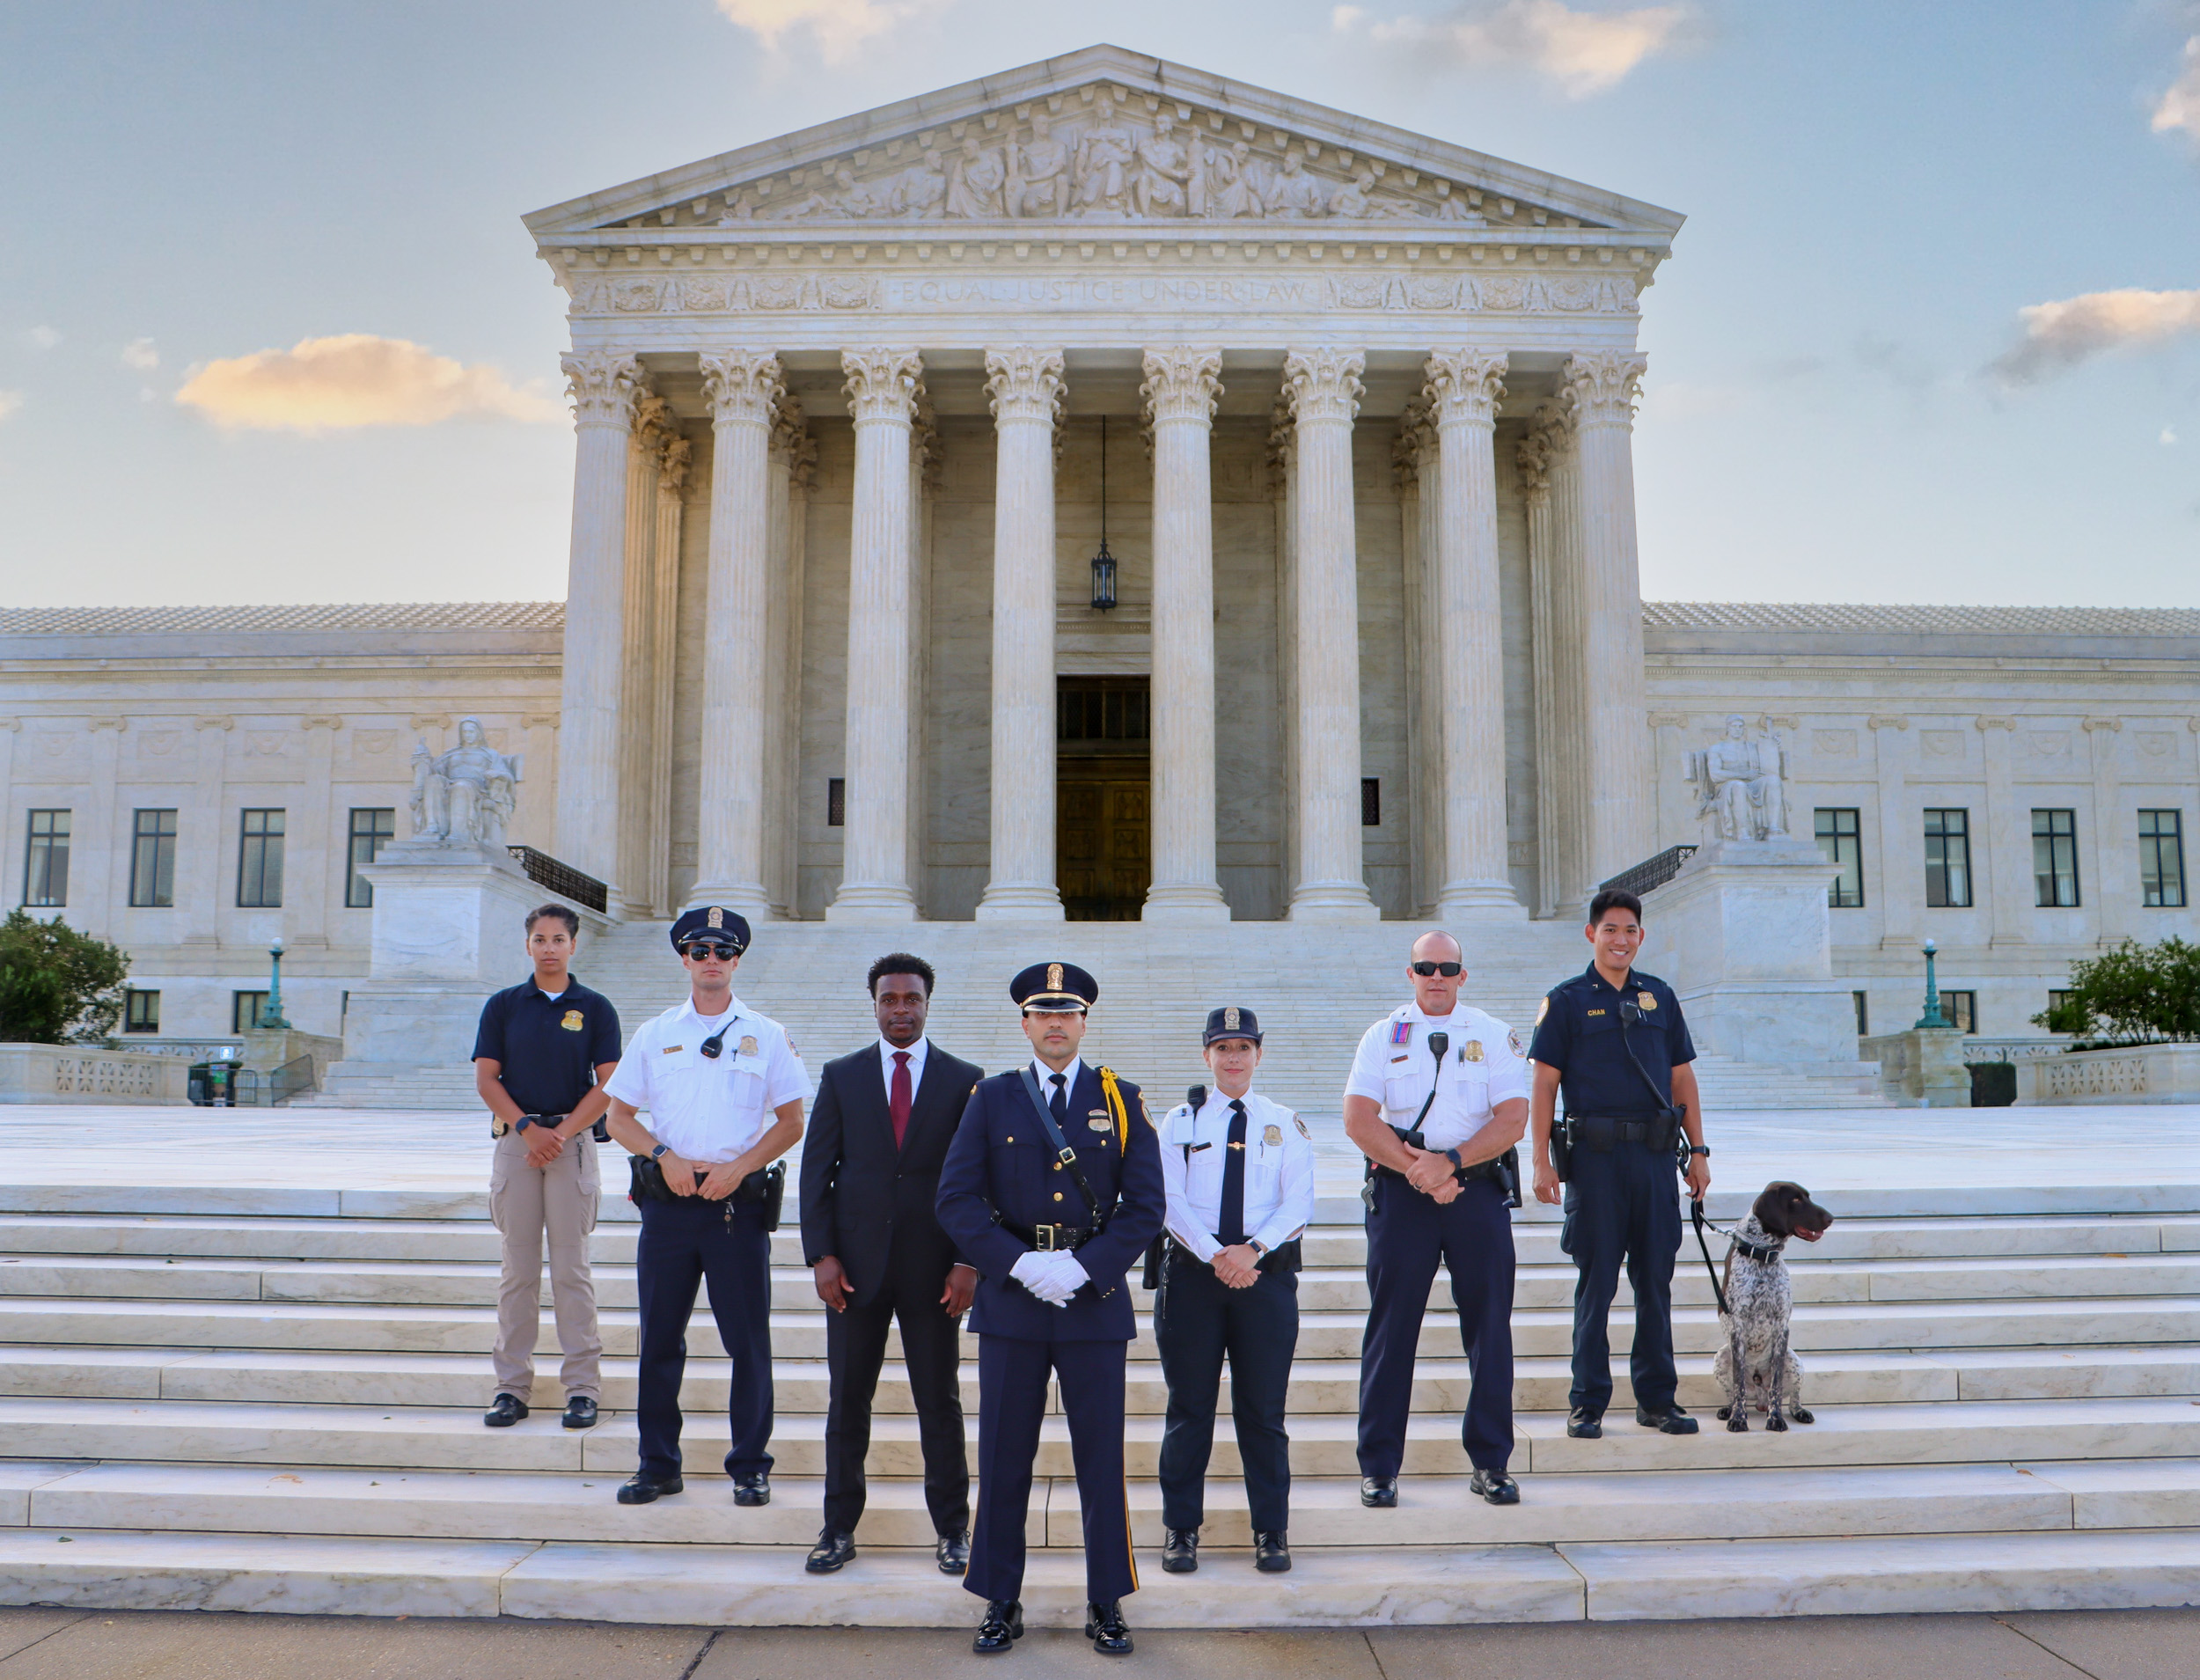 Supreme Court of the United States Police, DC 